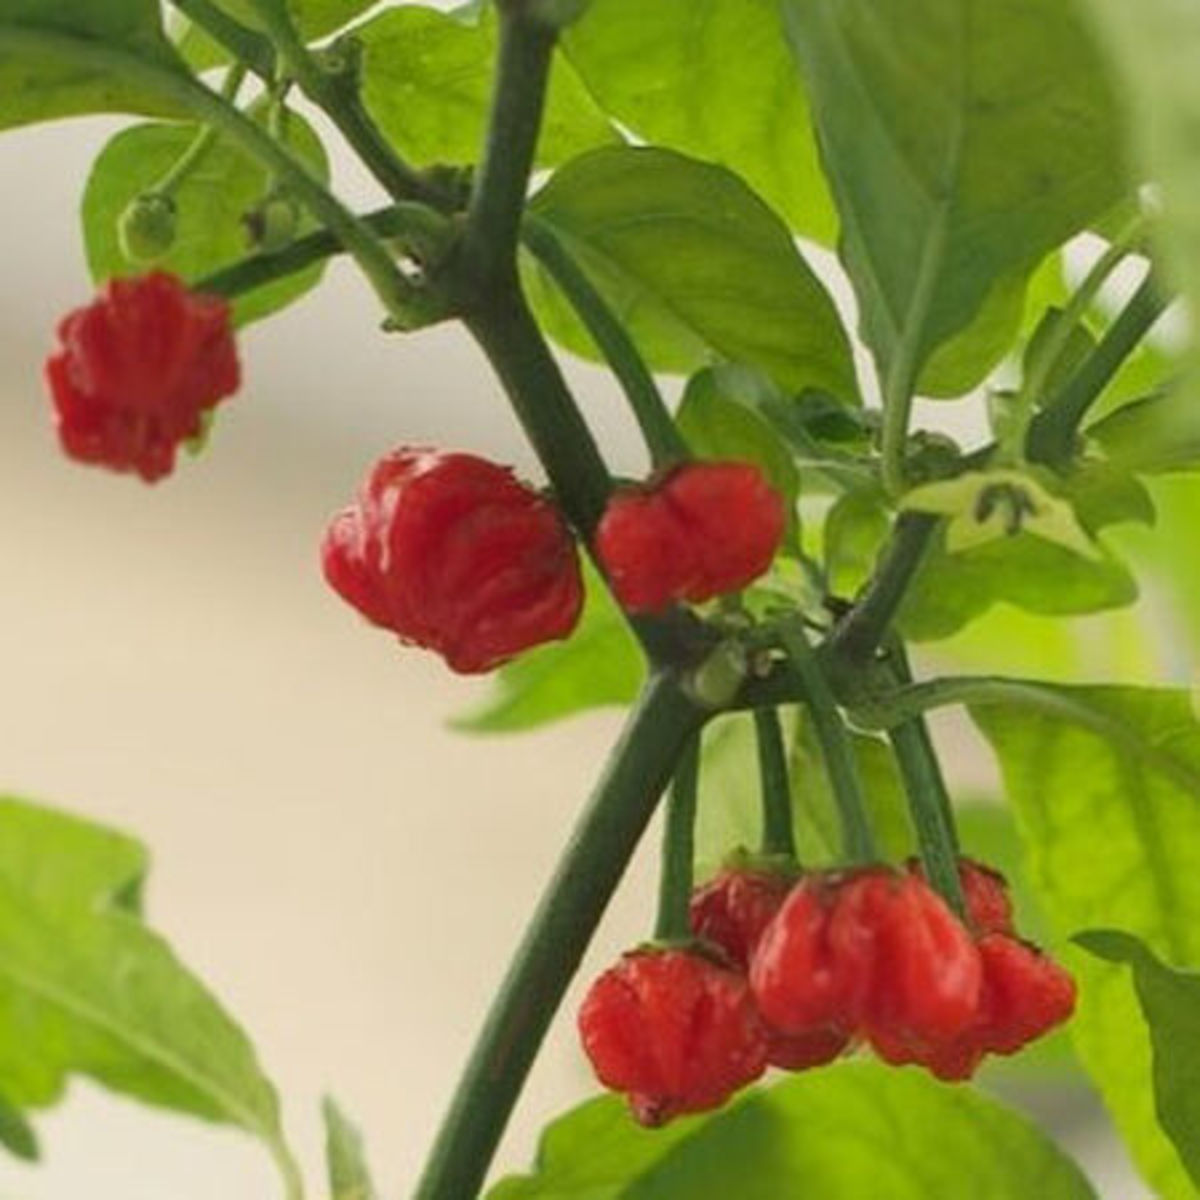 The Dragon's Breath Pepper is currently considered the world's hottest pepper.